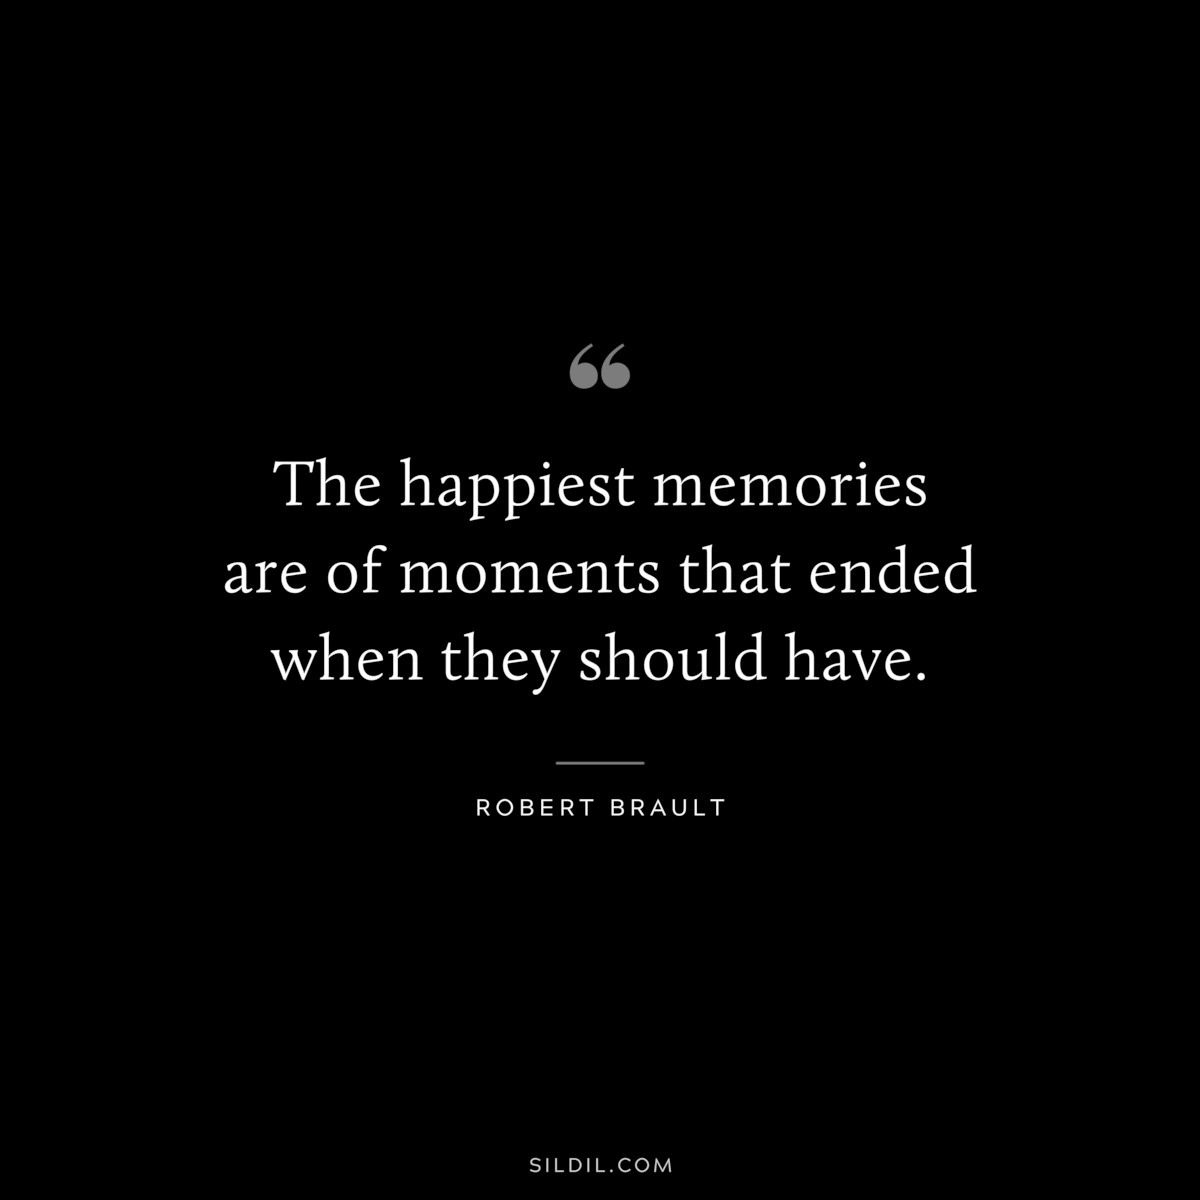 The happiest memories are of moments that ended when they should have. ― Robert Brault